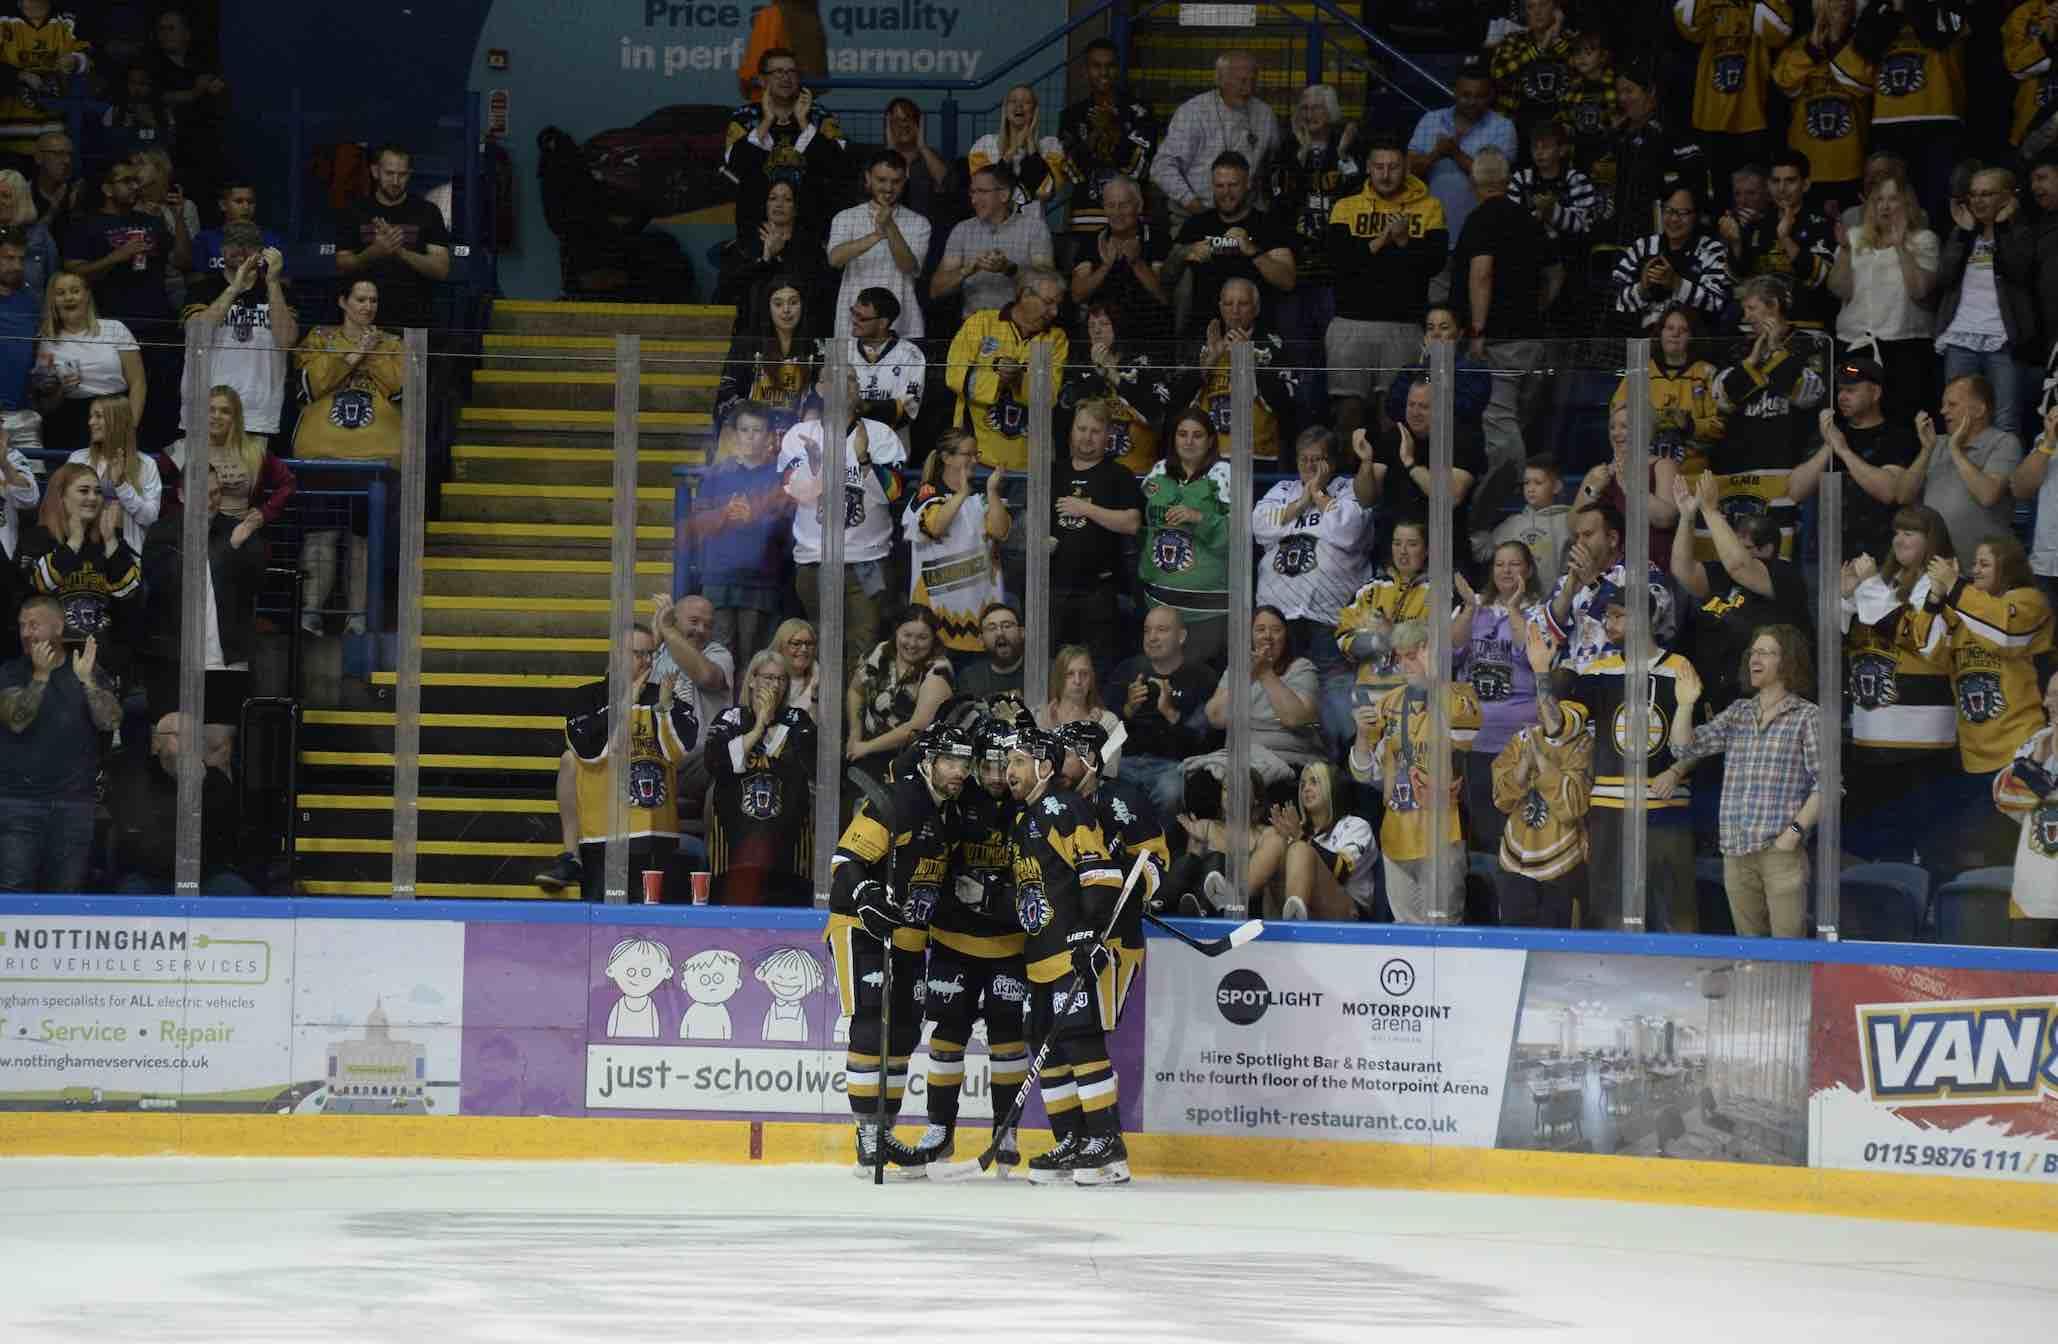 GAMEDAY PREVIEW AS PANTHERS HOST STEELERS IN CUP Top Image